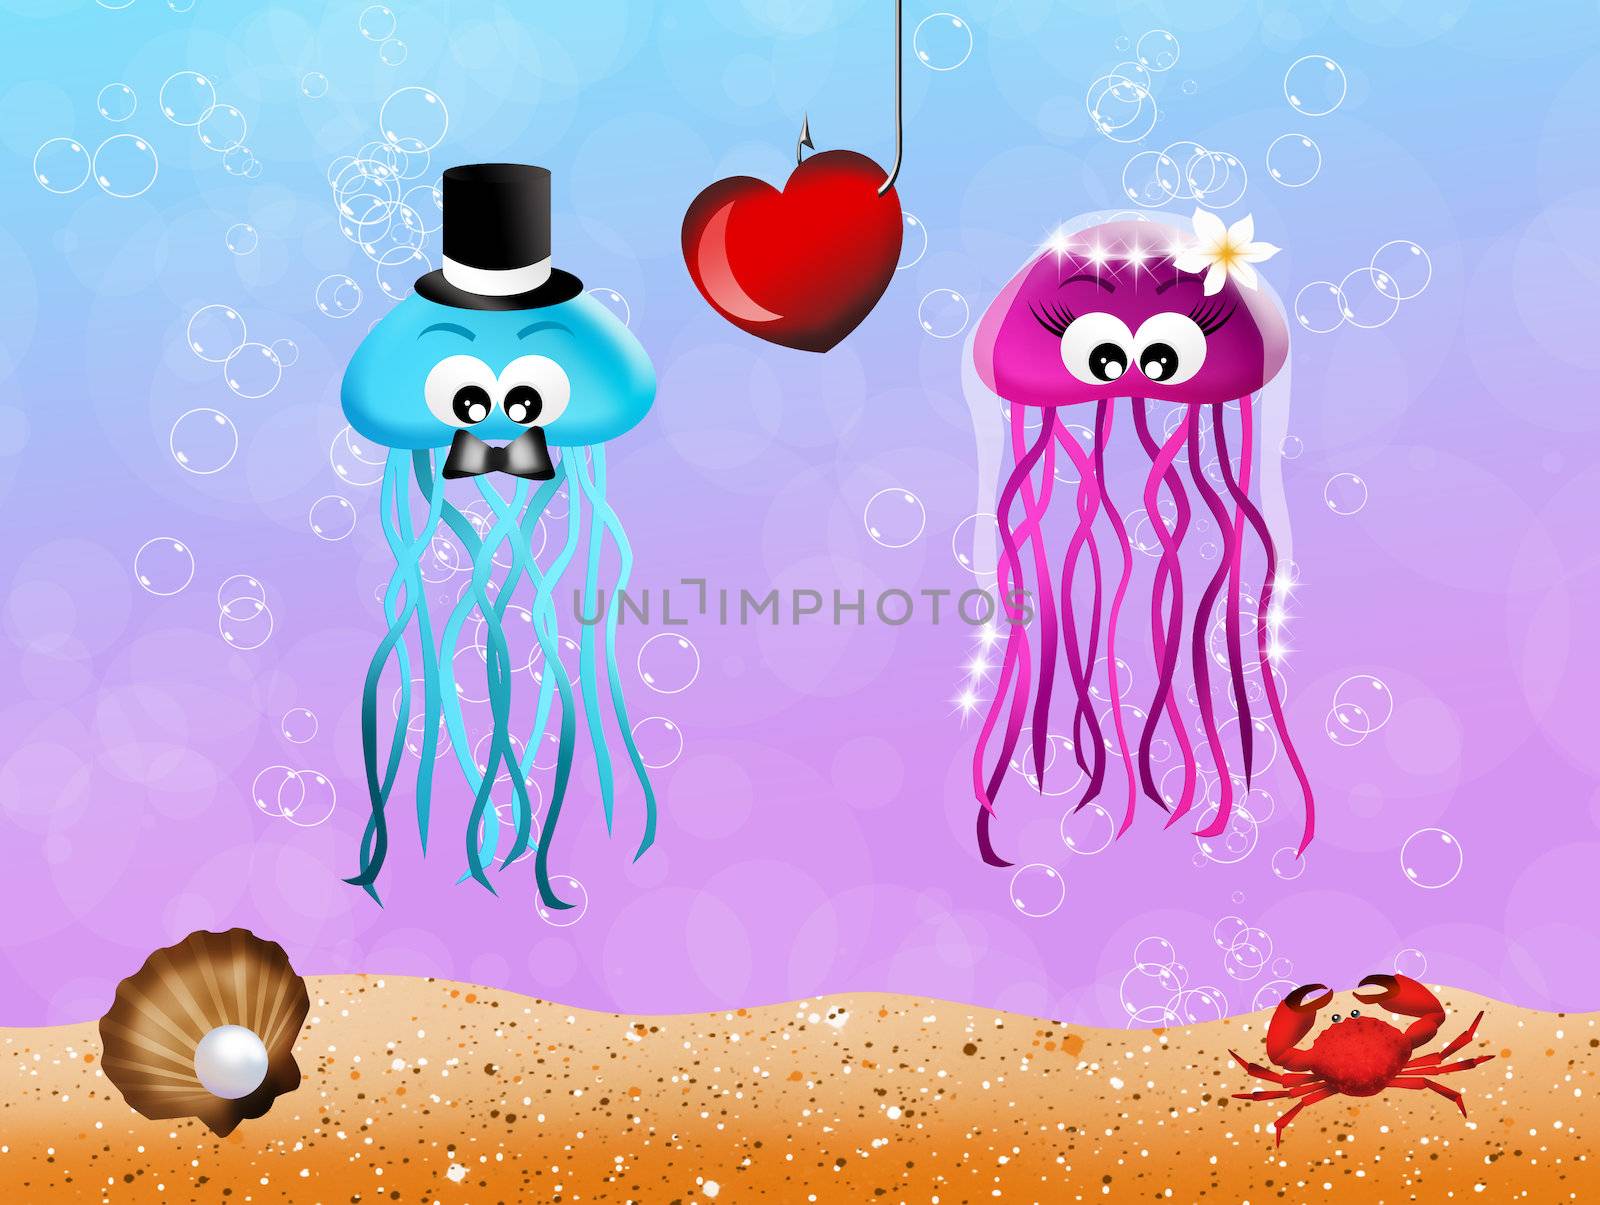 Jellyfishes by adrenalina